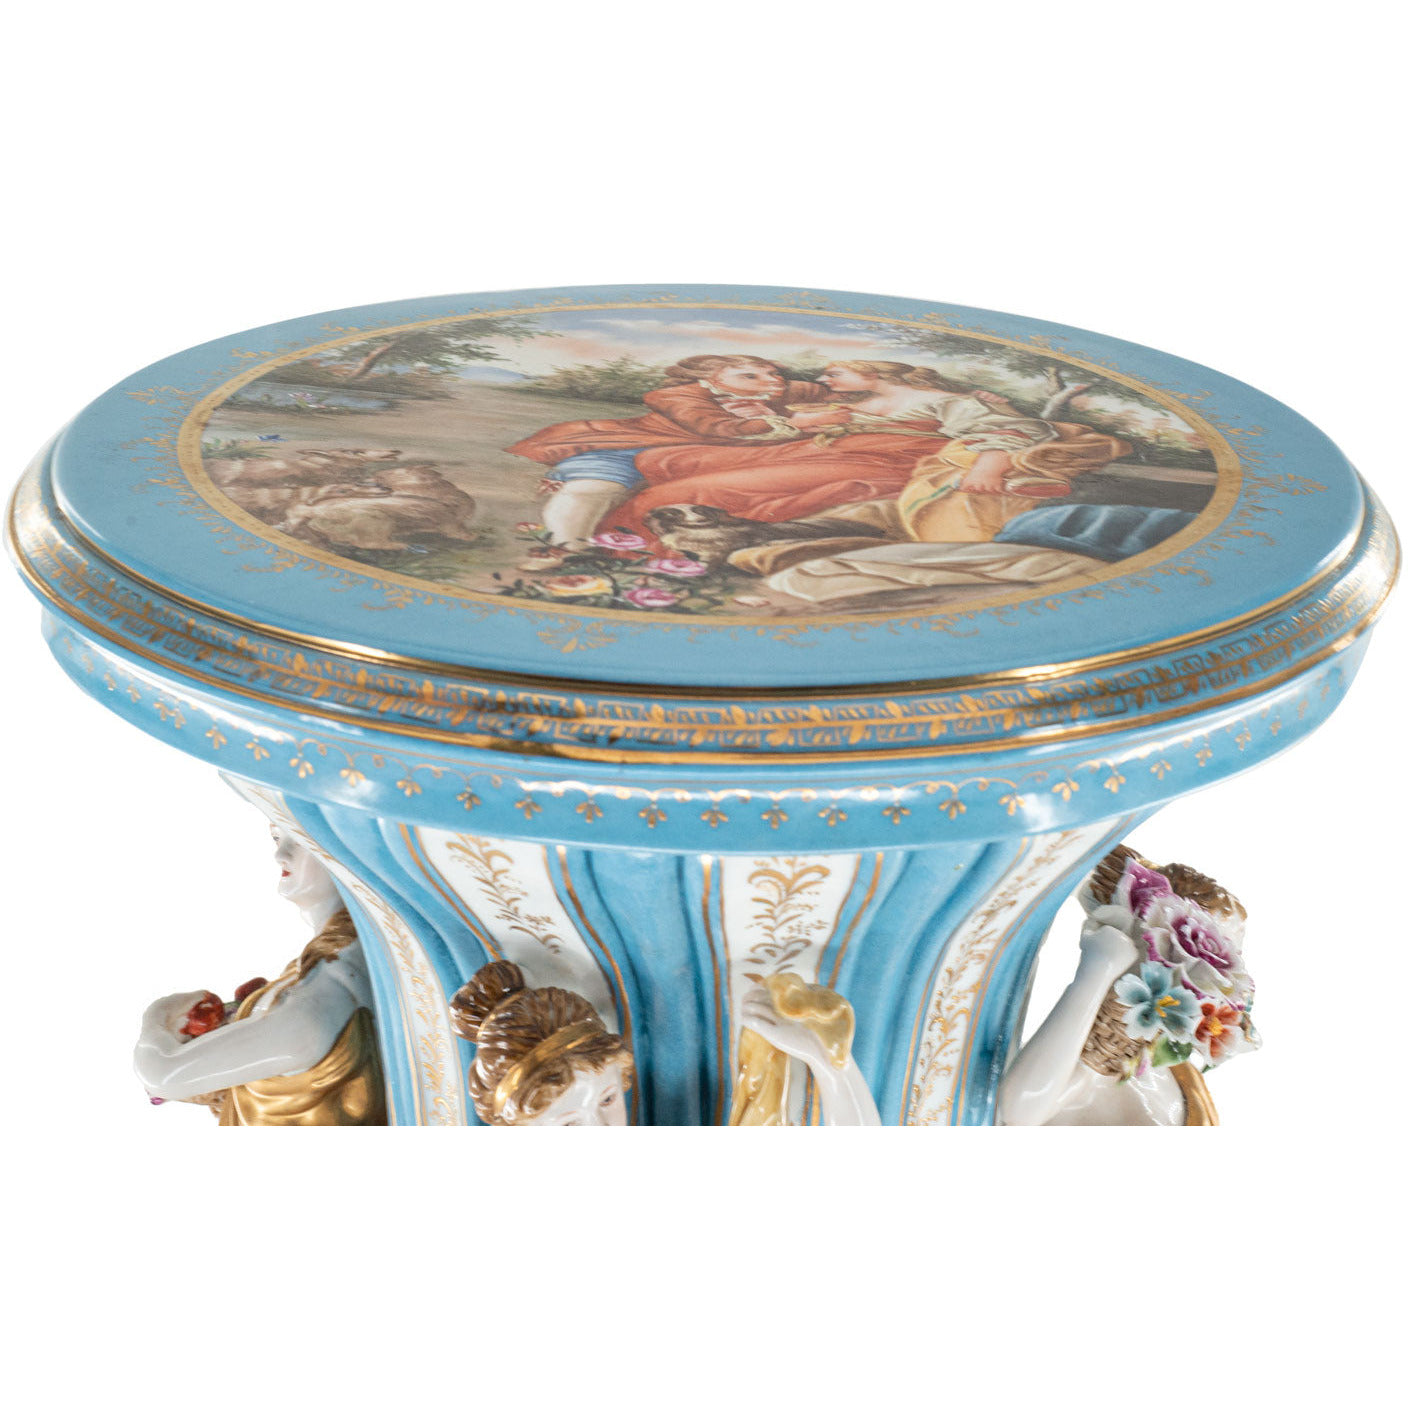 Three Muses Hand-painted Porcelain Chair